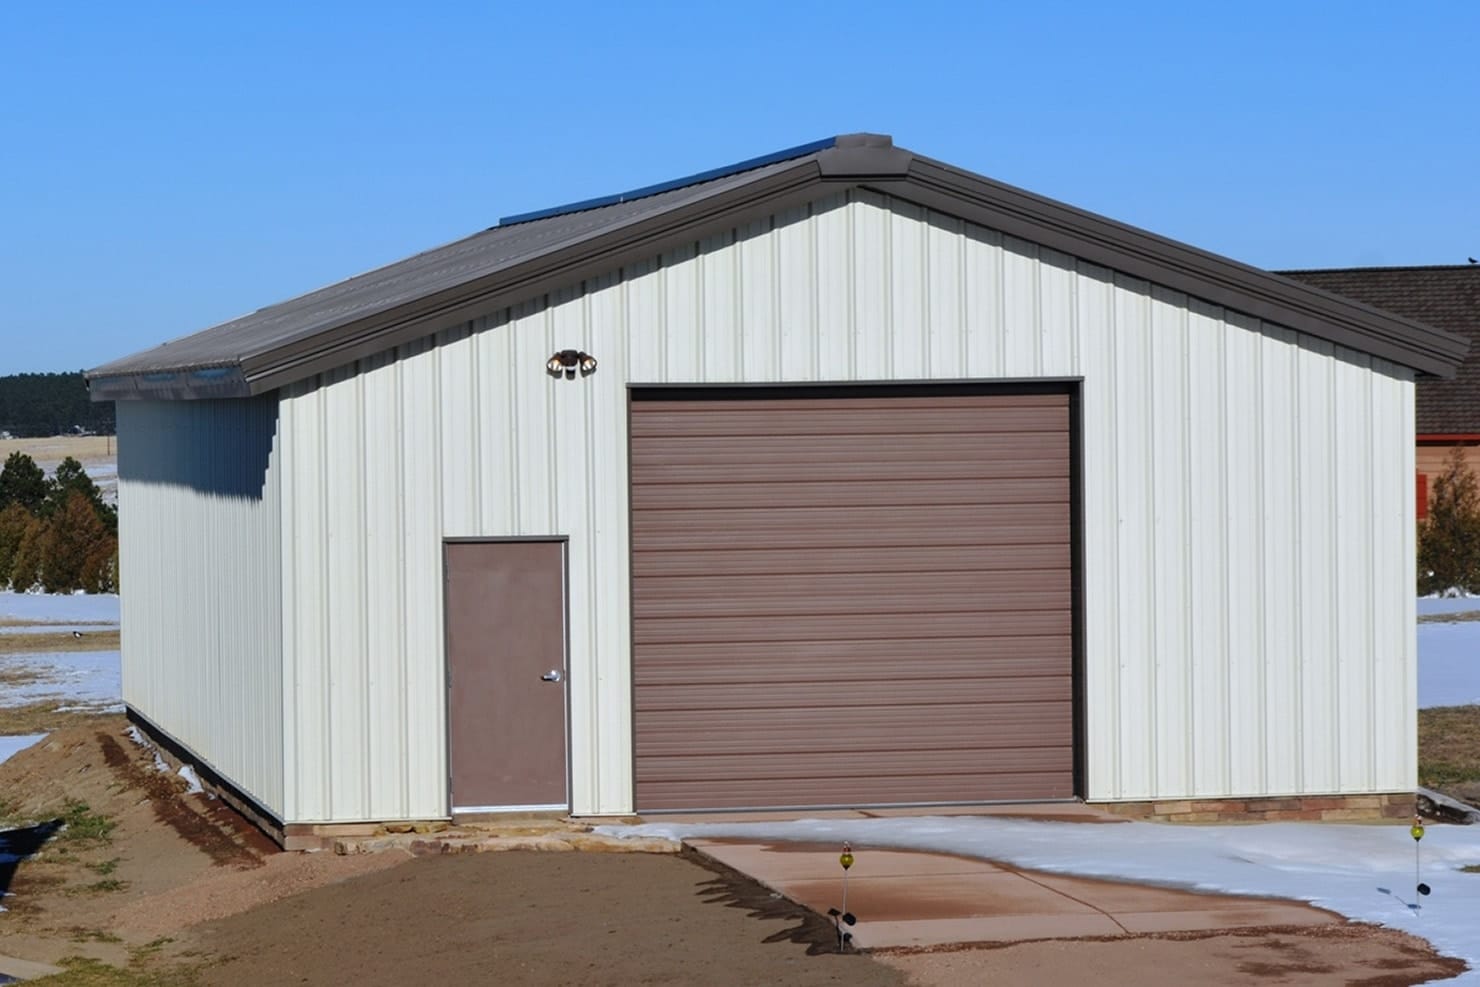 This is an image of a General Steel metal shed.